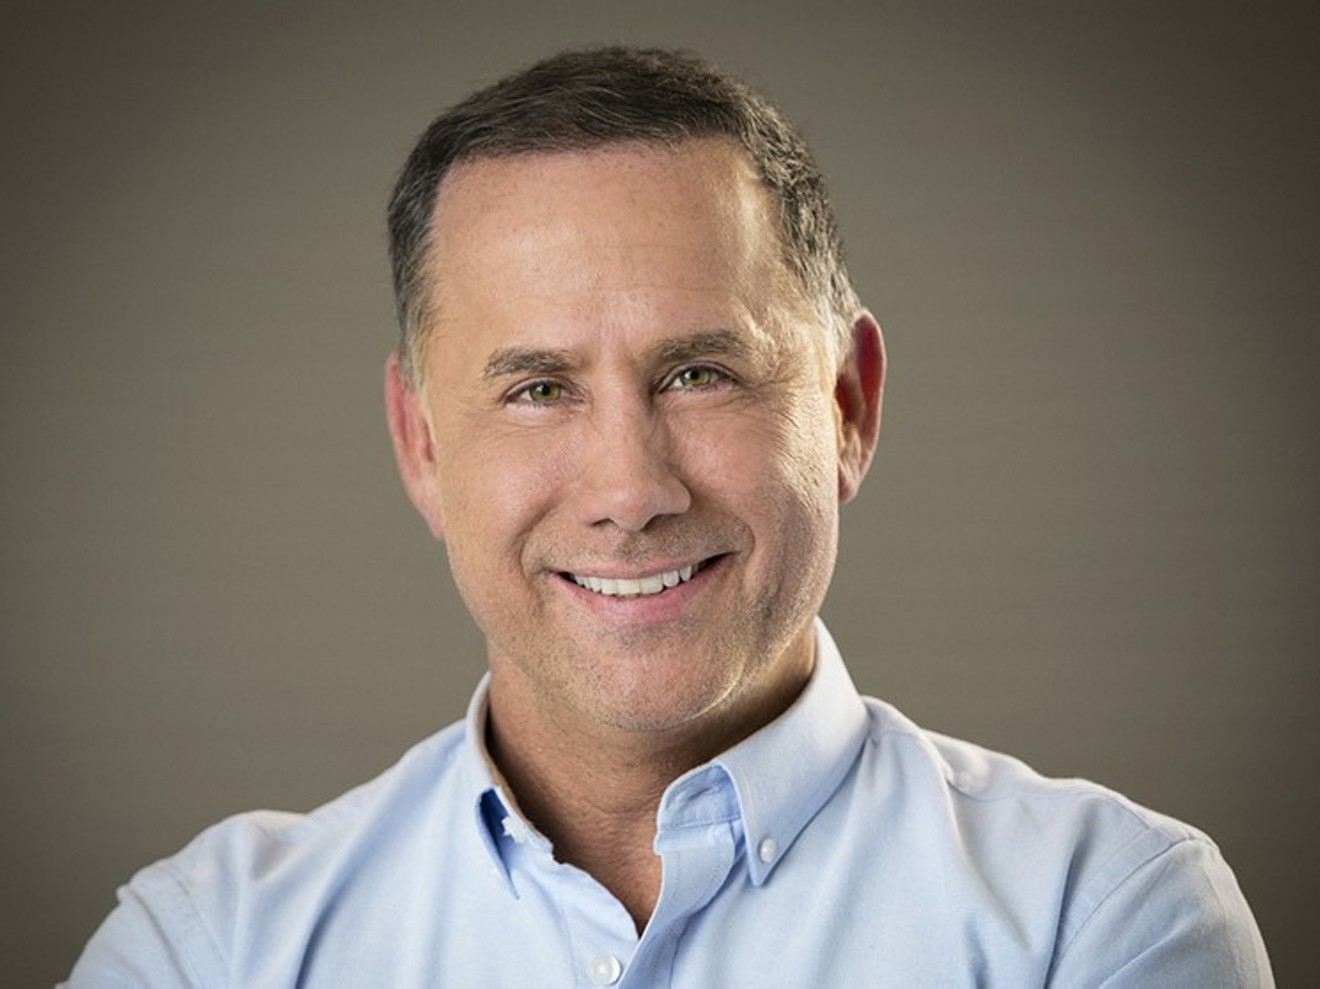 Former Miami Beach Mayor Philip Levine is running as a Democratic candidate for Florida's governor.